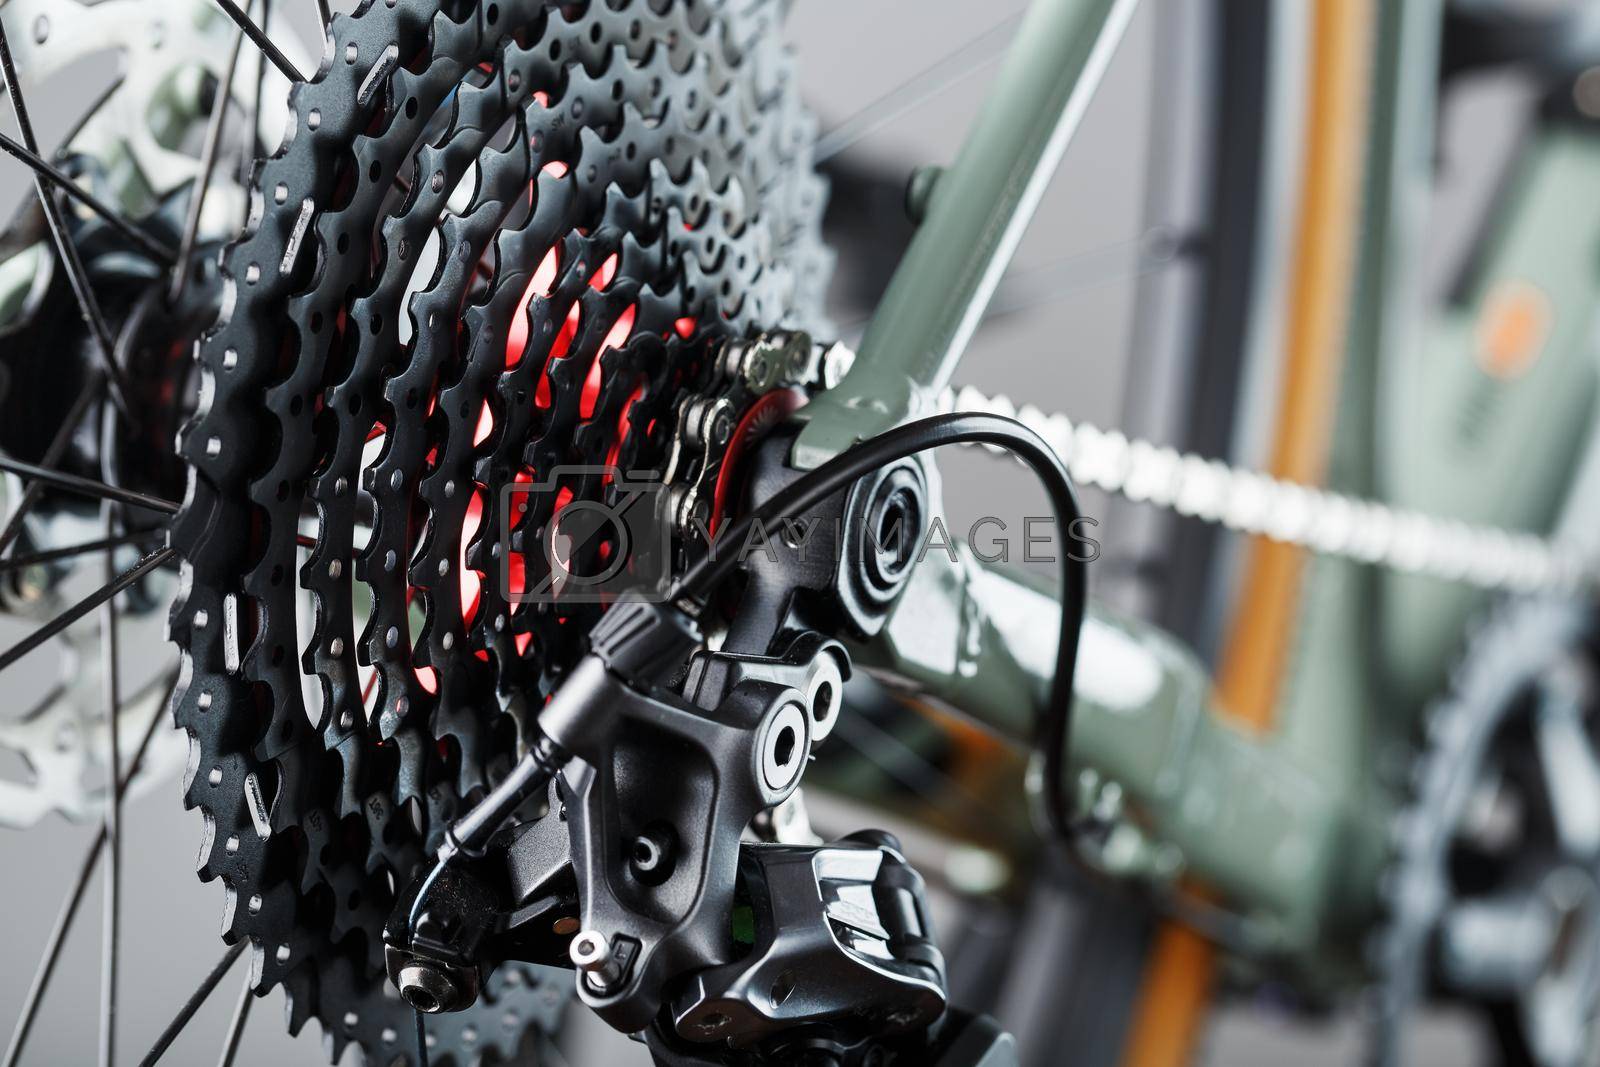 Royalty free image of Rear bicycle cassette speeds with a wide range and chain close-up by AlexGrec